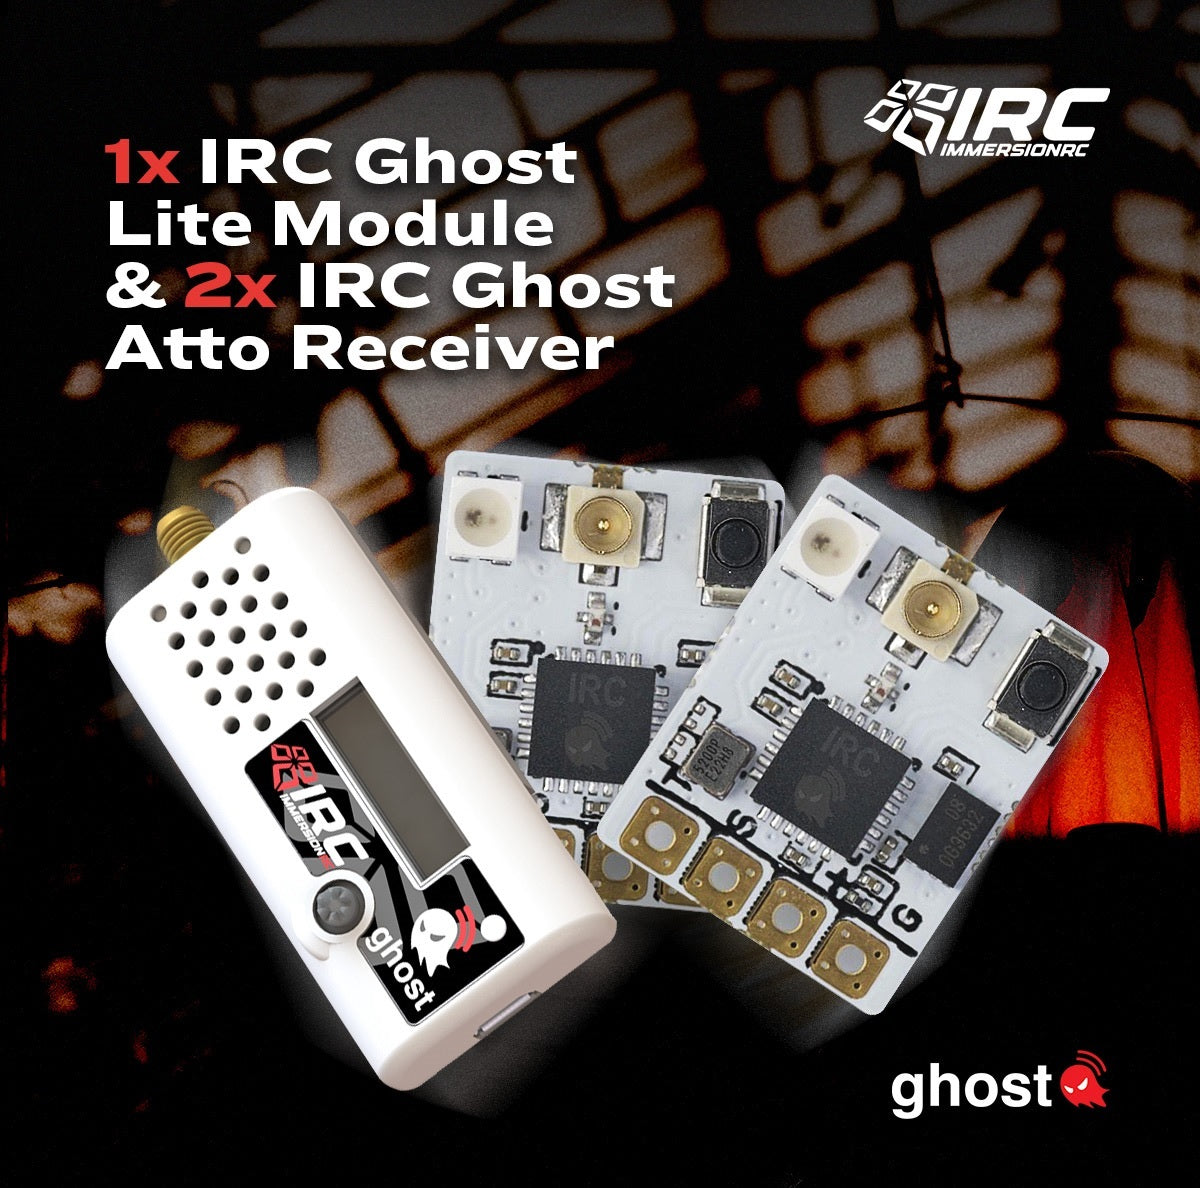 Immersion RC Ghost Halloween Bundle